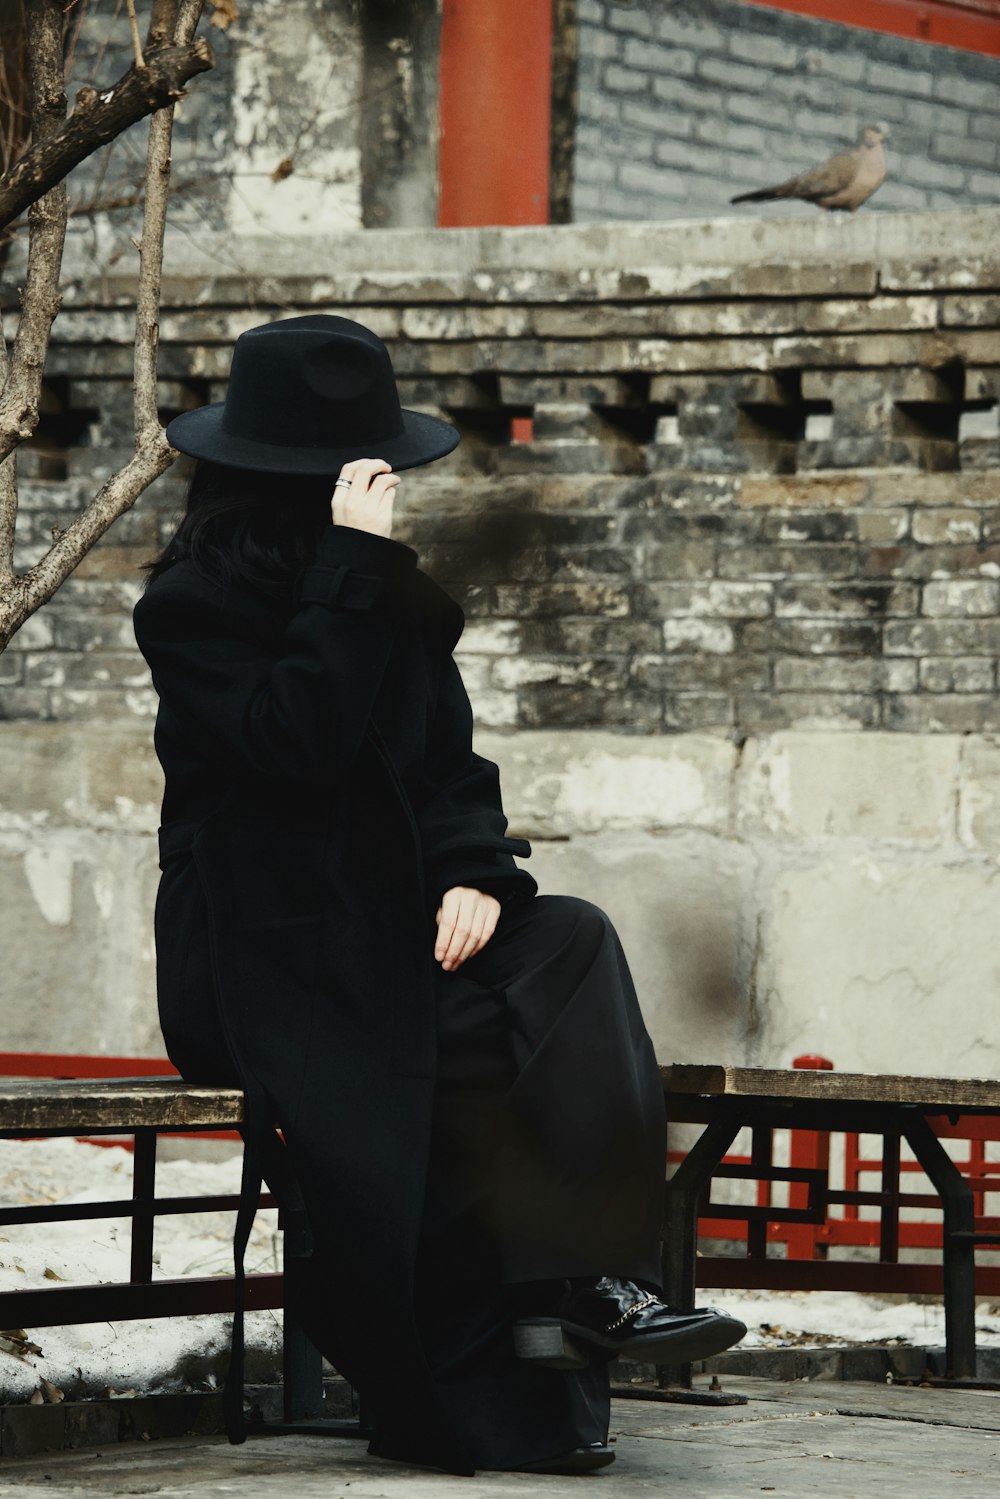 a woman sitting on a bench wearing a black hat